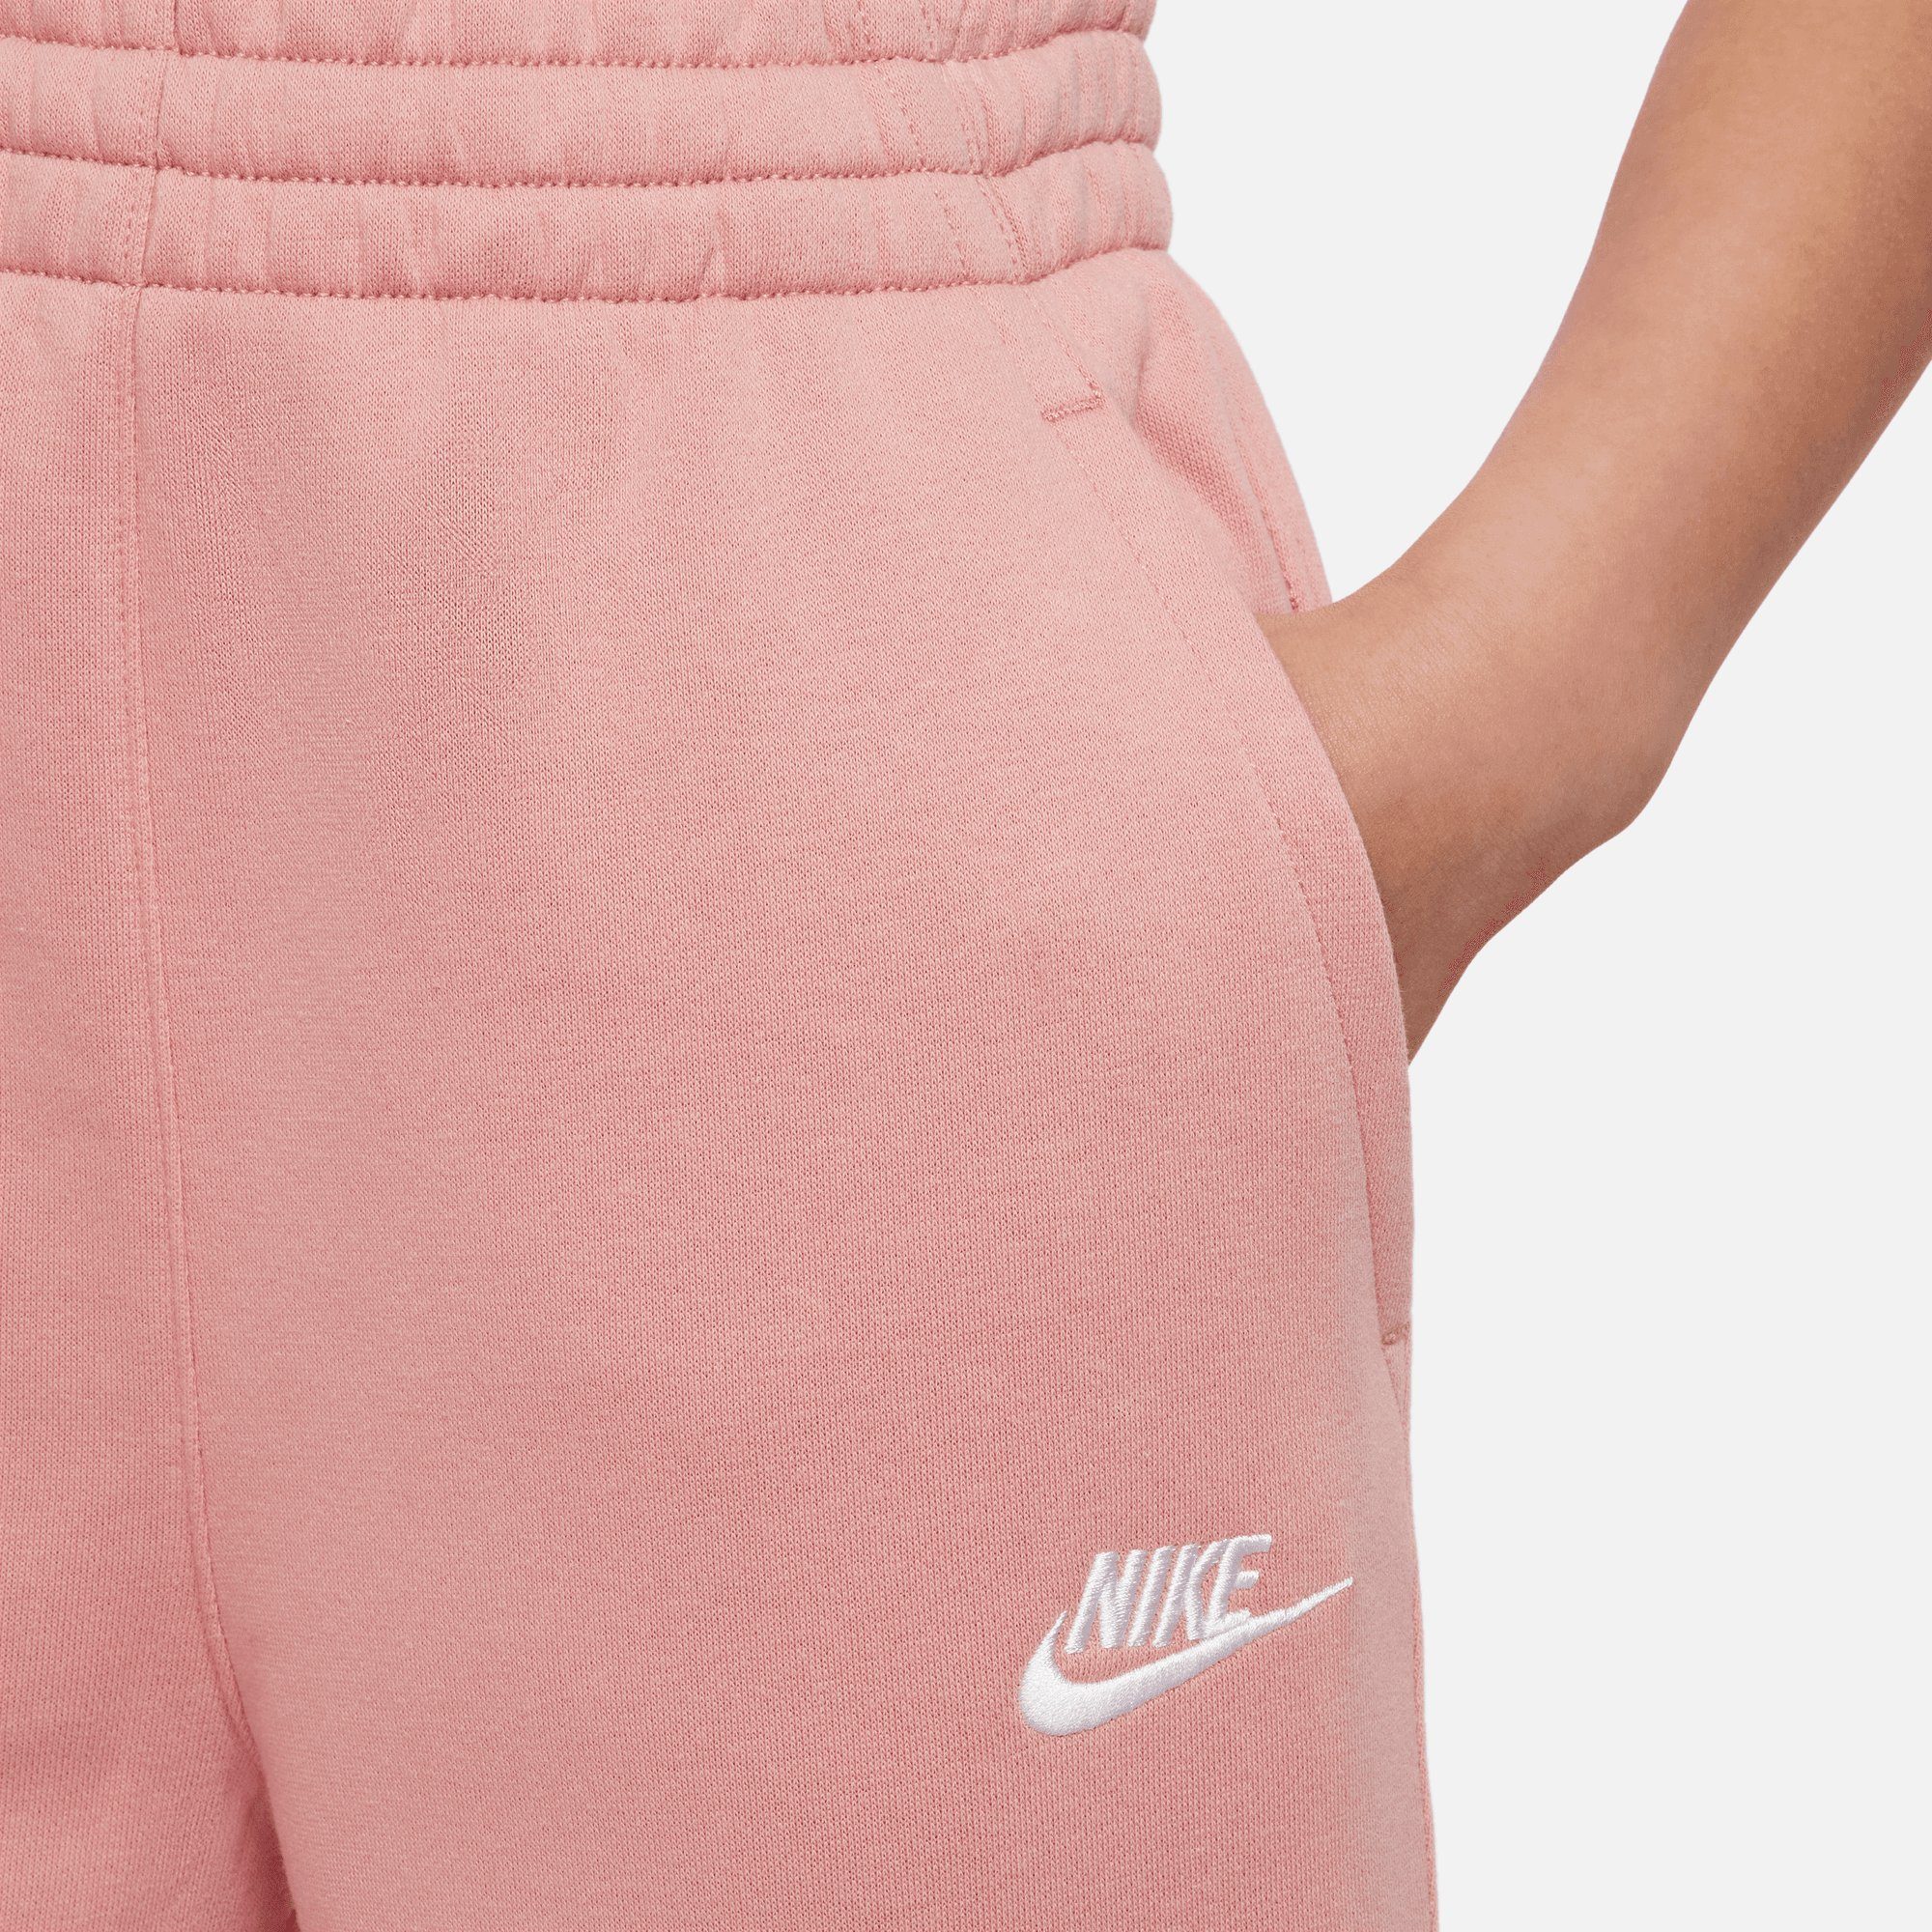 Nike Sportswear Jogginghose CLUB STARDUST/RED STARDUST/WHITE KIDS' RED FITTED FLEECE PANTS HIGH-WAISTED BIG (GIRLS)